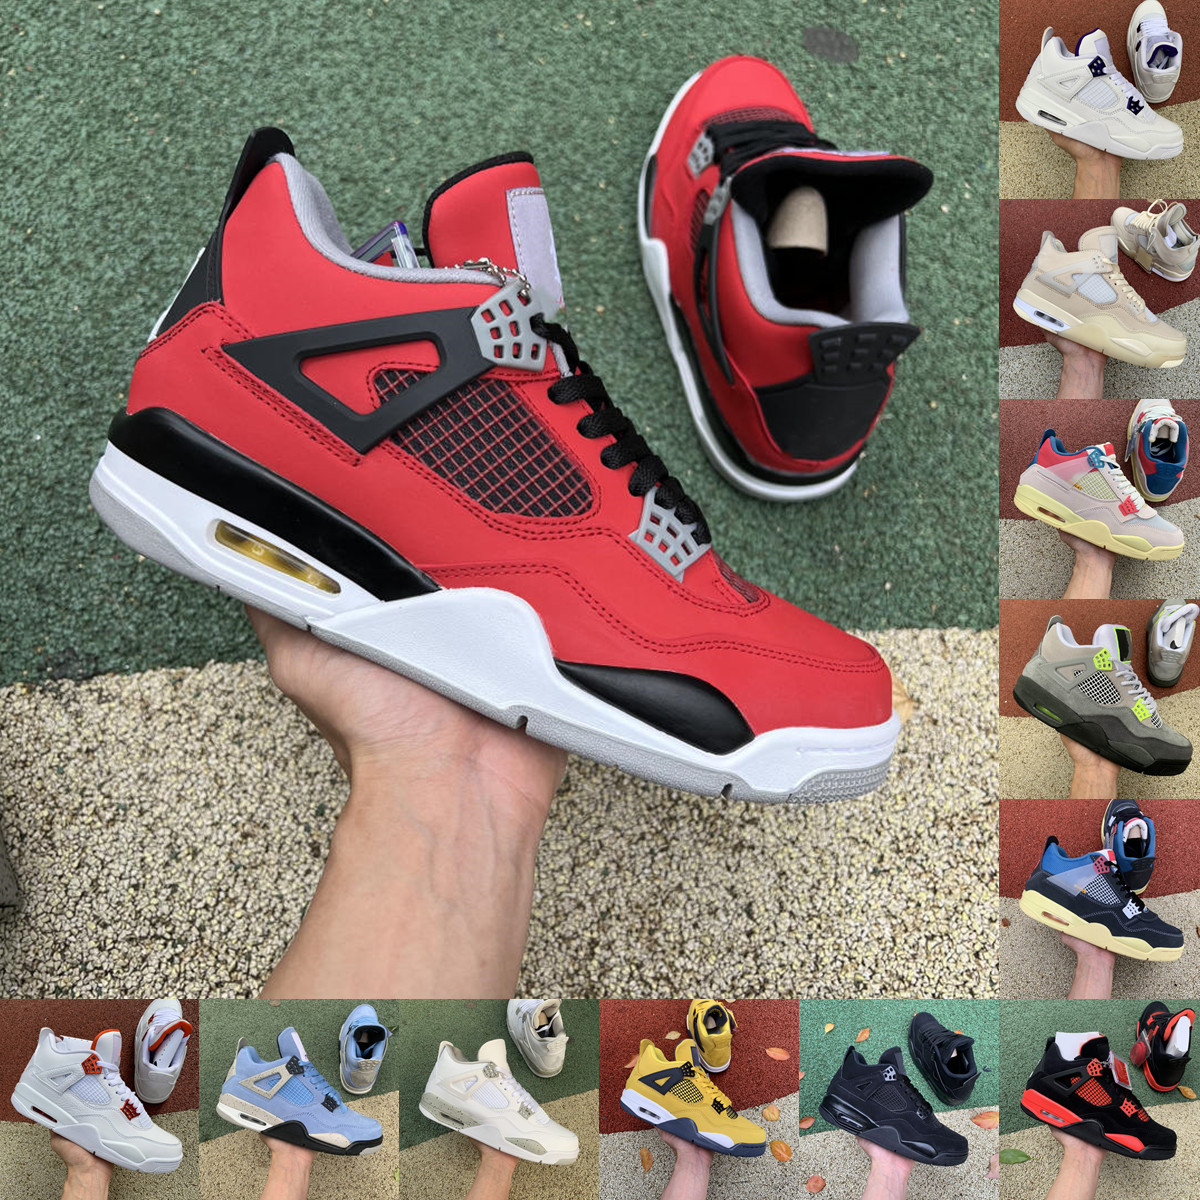 

Jumpman Lightnings 4 4s Basketball Shoes Mens Women Cream Sail Red Thunder White Oreo Bred Ow Union Taupe Haze What The Black Cement Cat Royalty air Trainer Sneakers, Please contact us